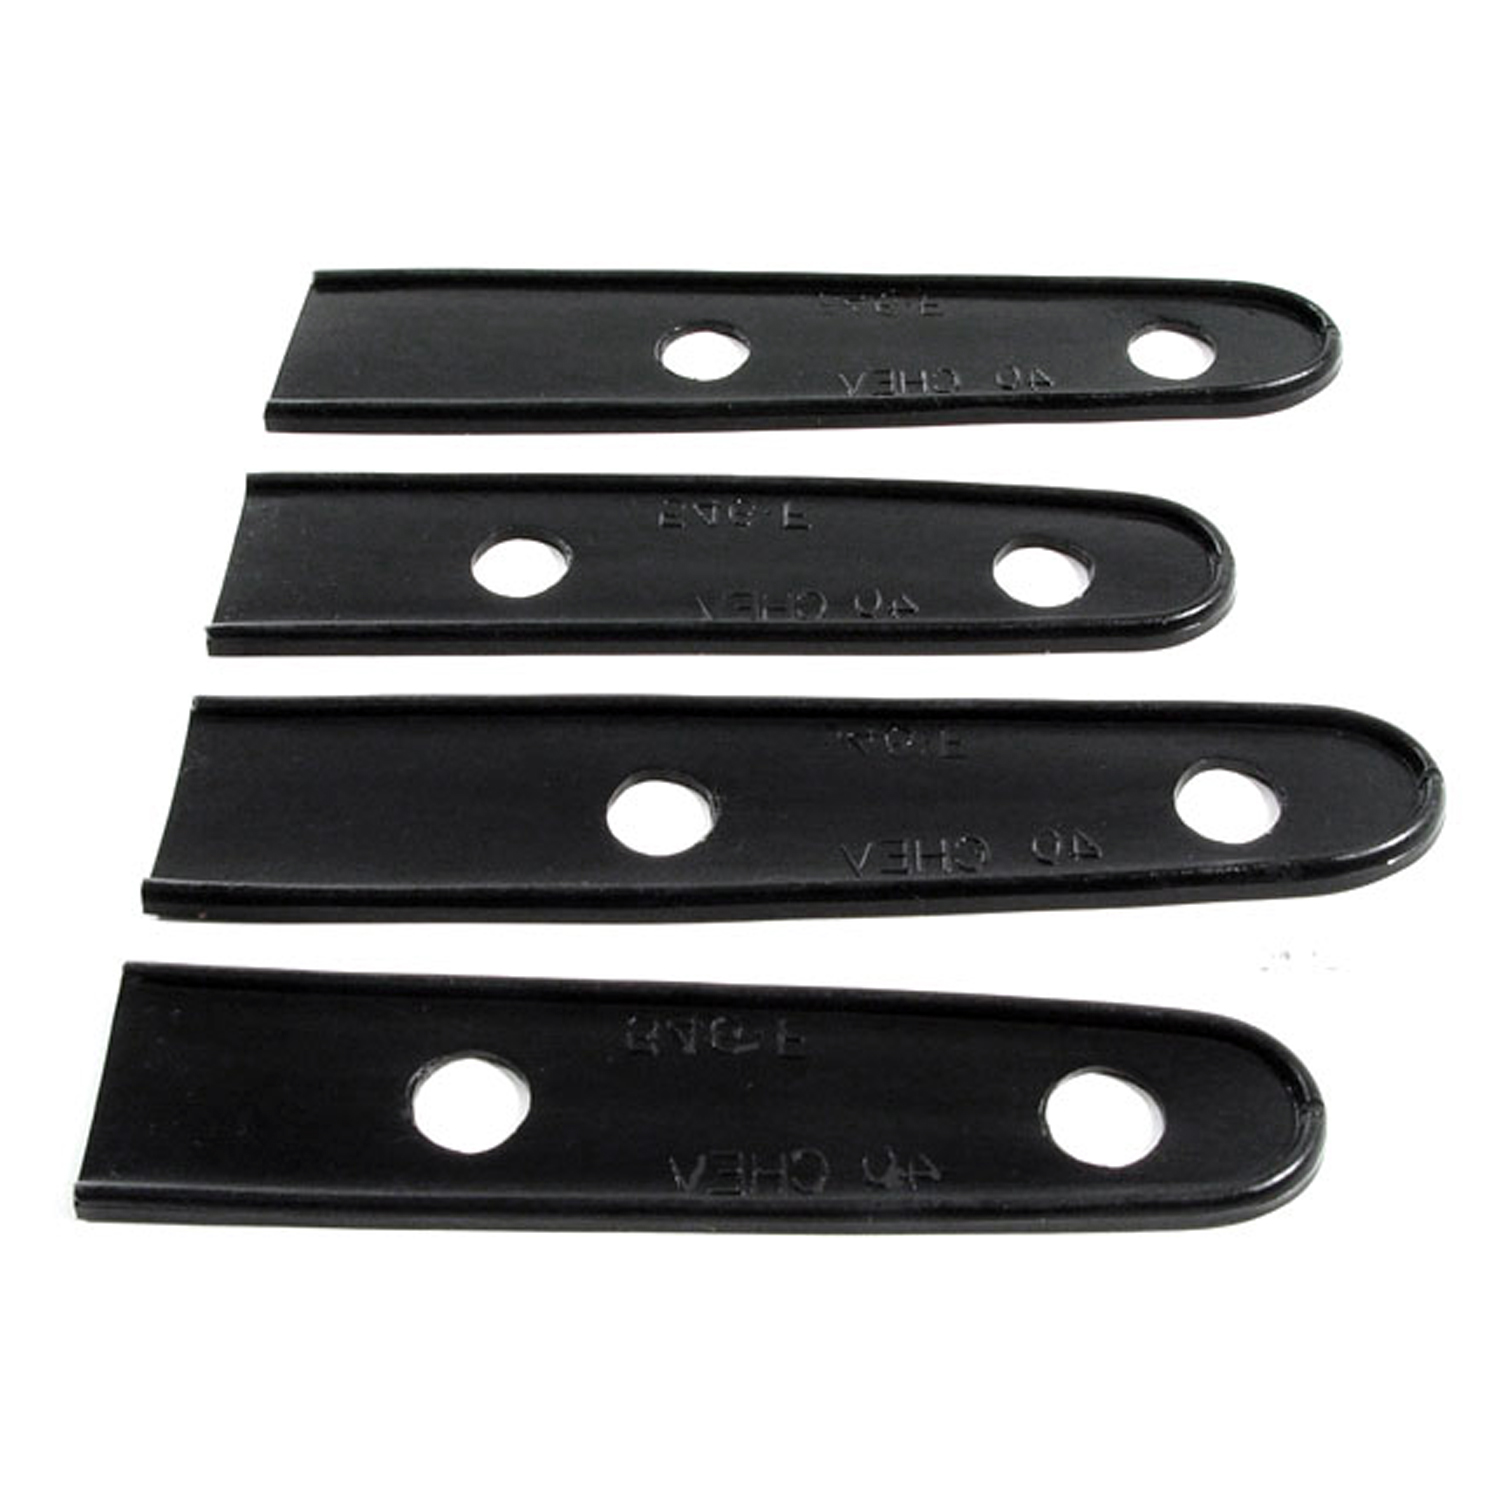 1940 Chevrolet Master 85 Trunk Hinge Pads.  1-3/8 wide X 11-3/8 long.  4-Piece Set-MP 546-F